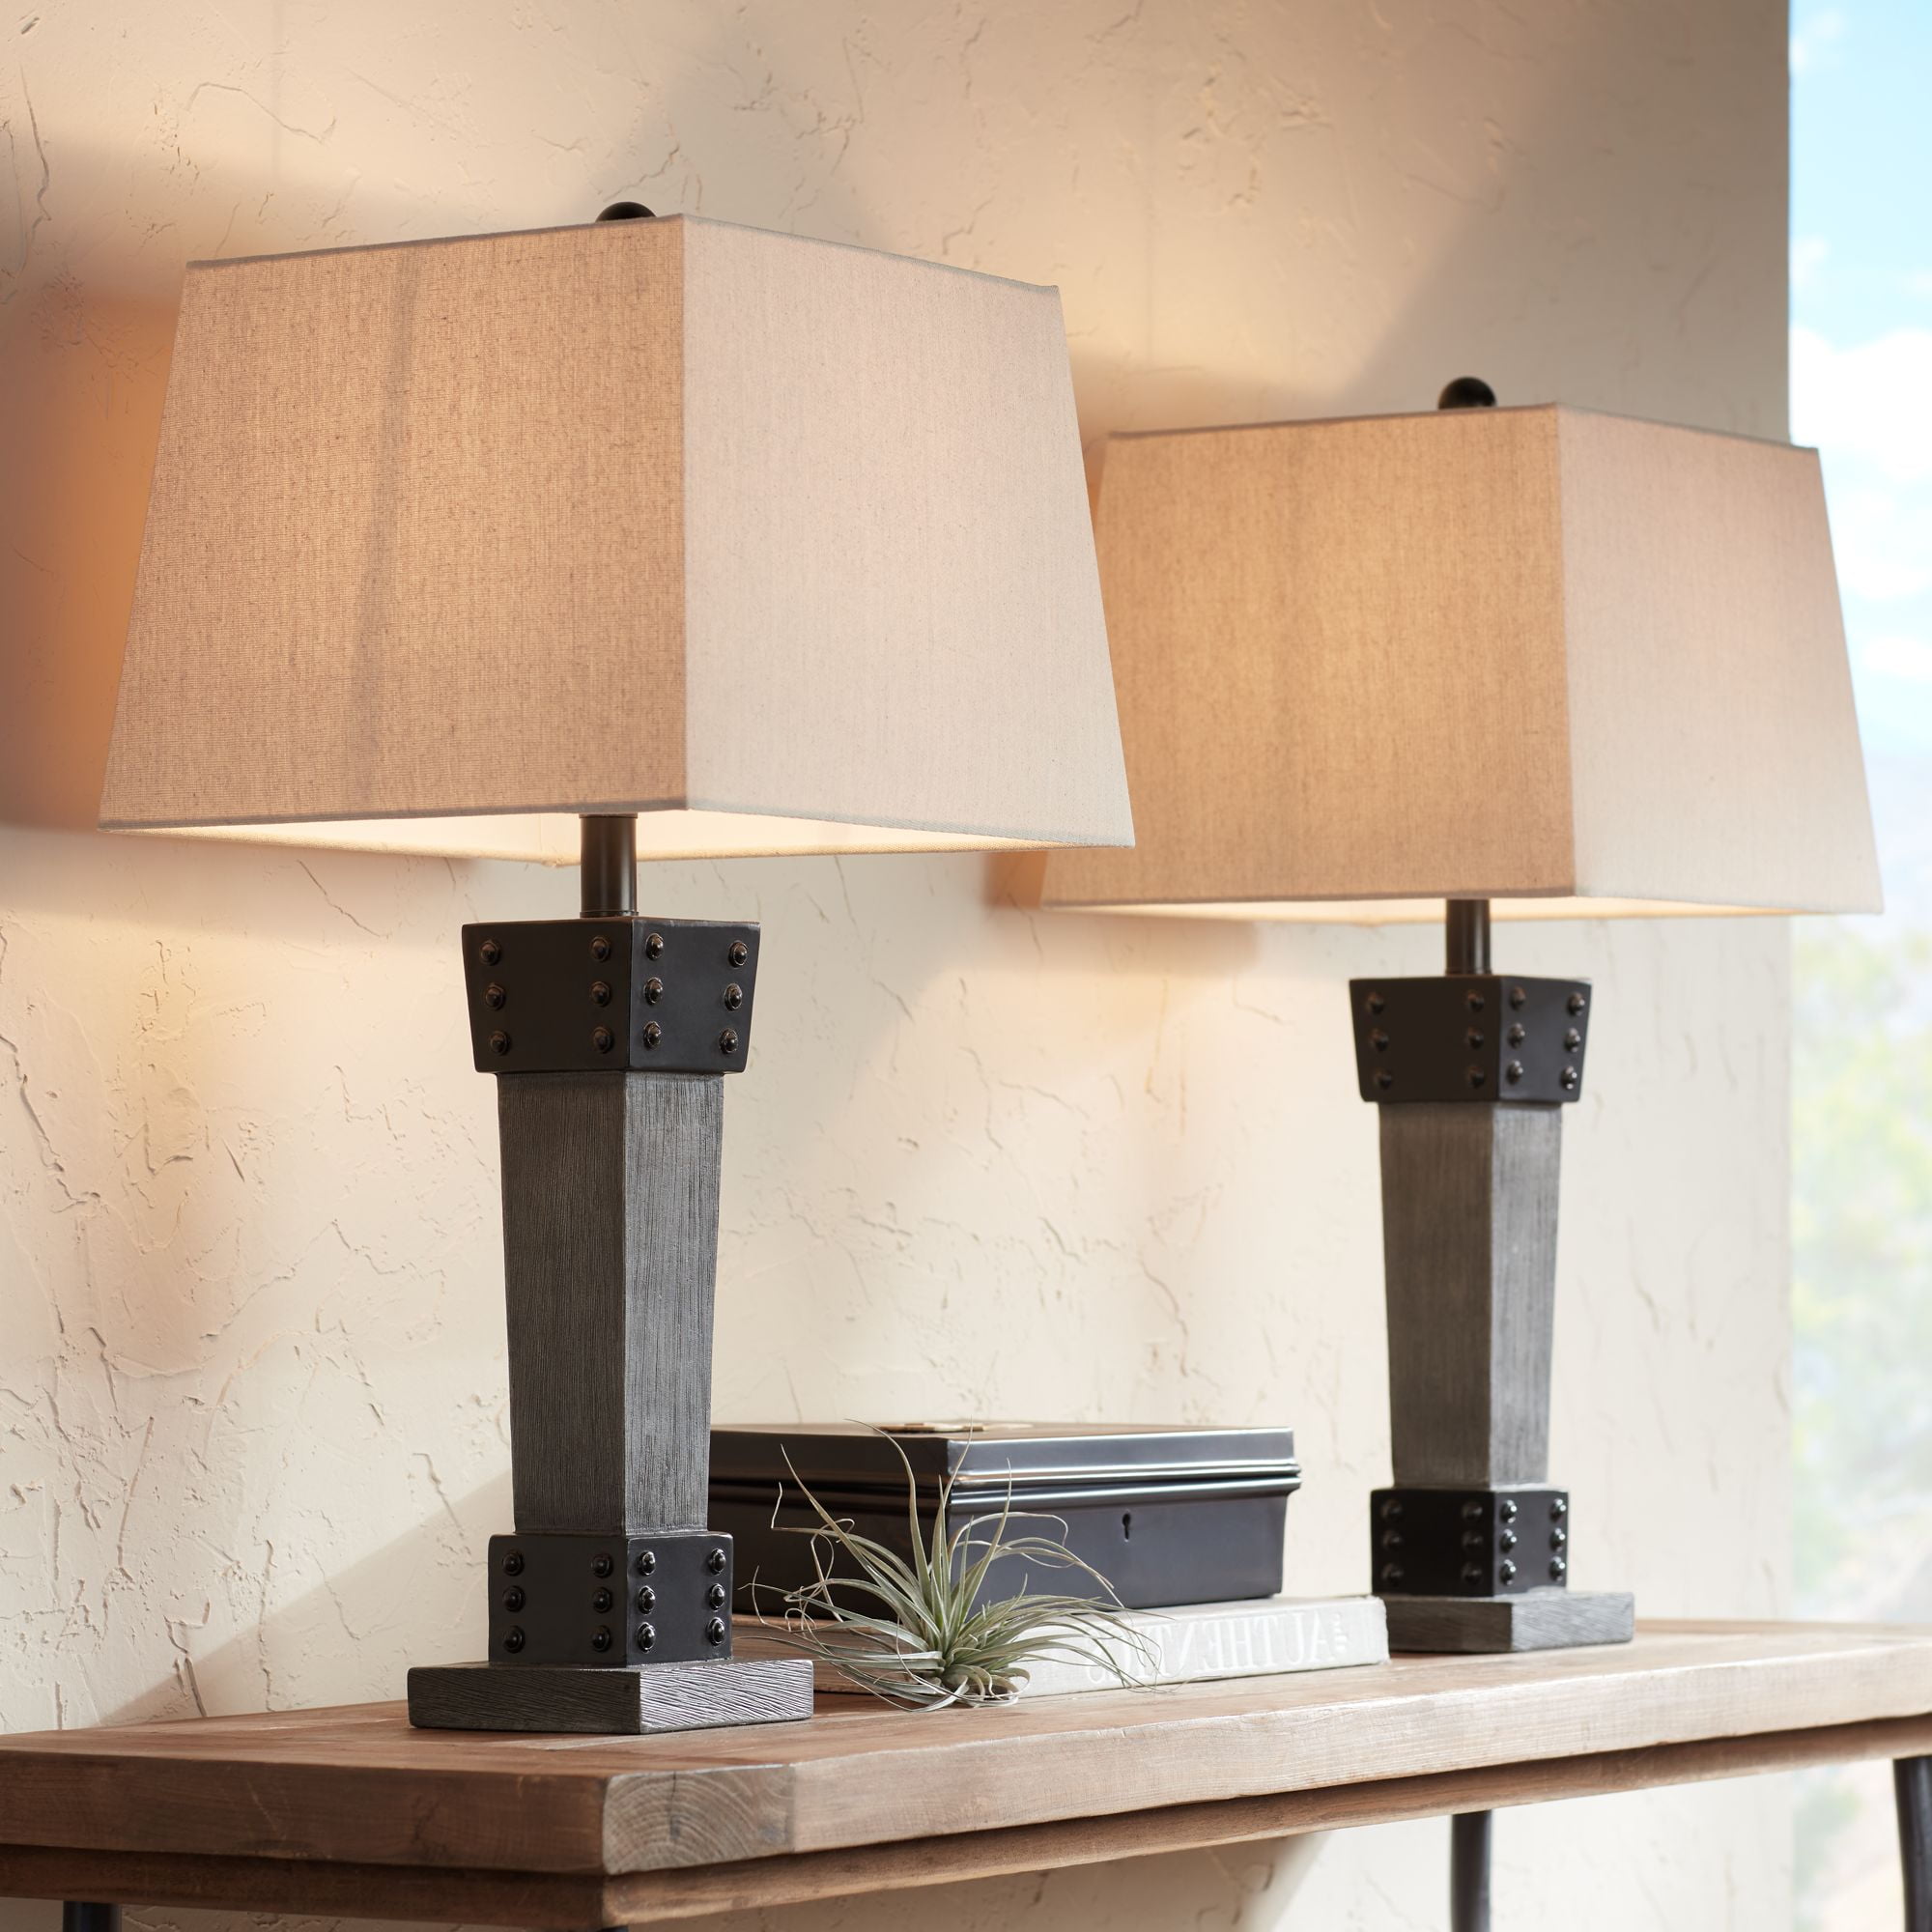 John Timberland Modern Farmhouse Table, Wooden Table Lamps For Bedroom